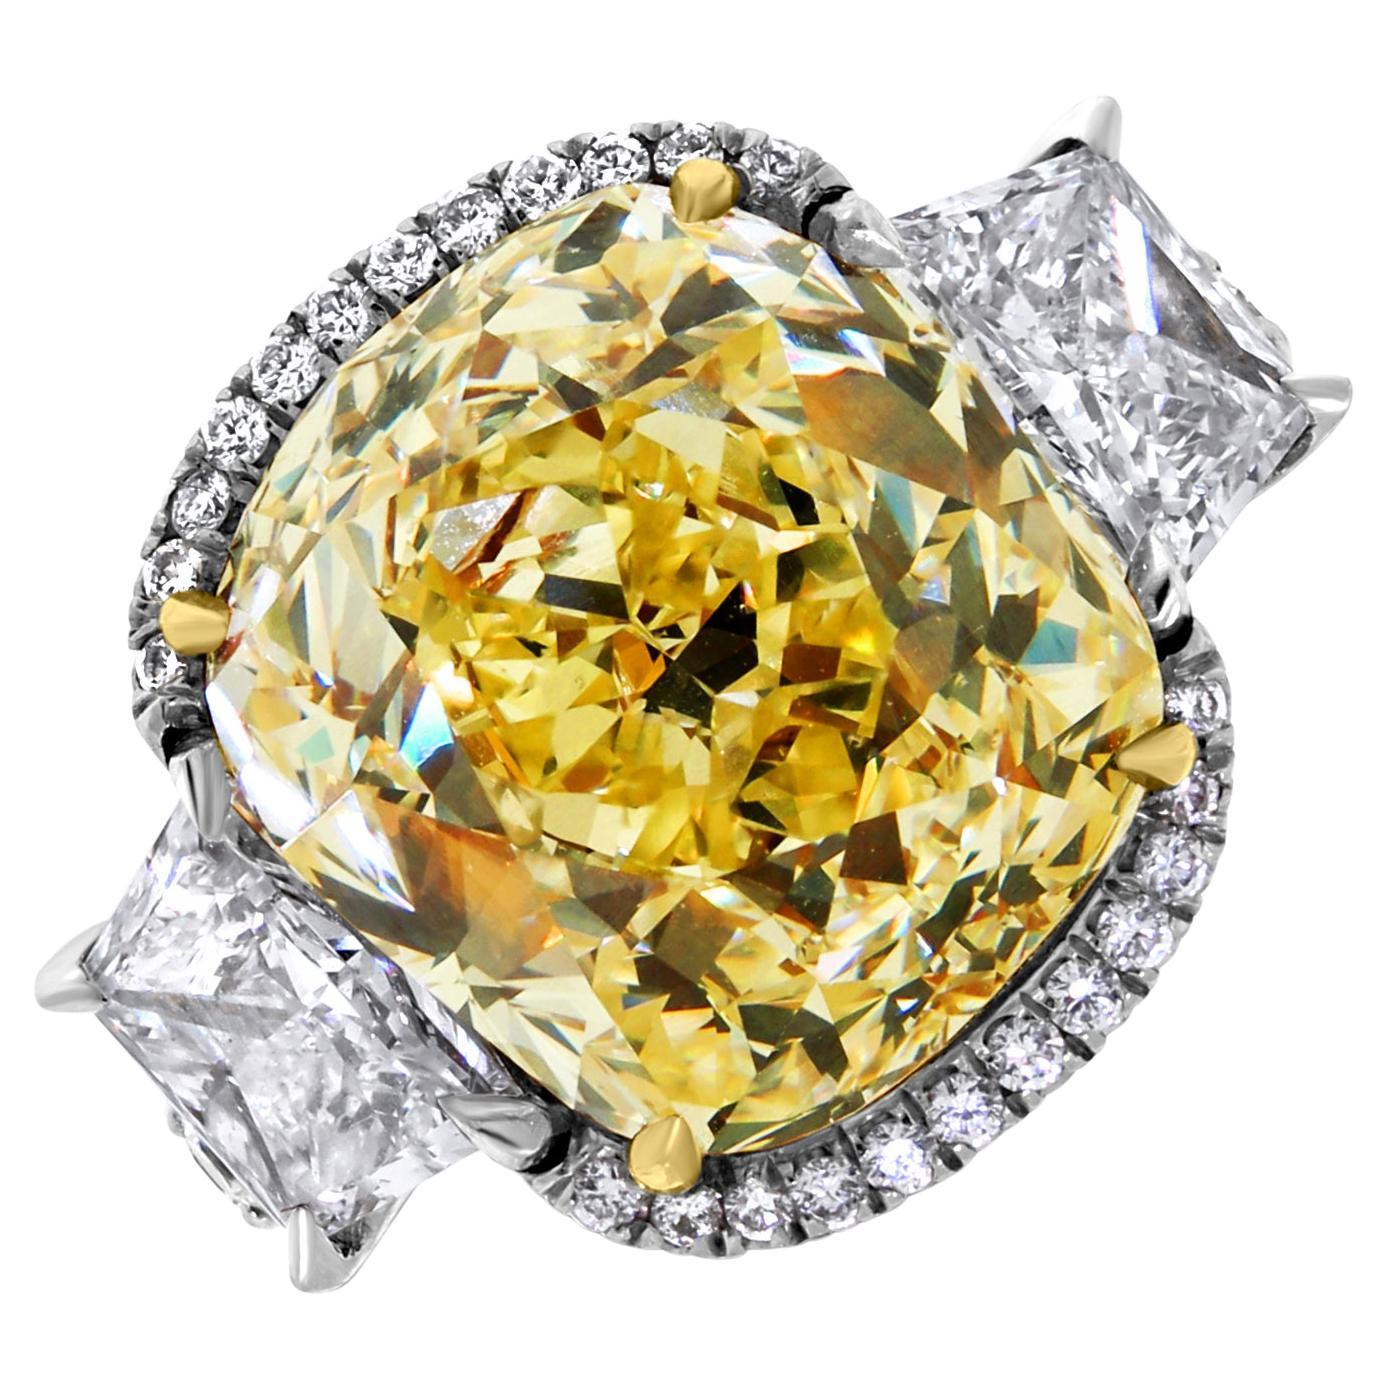 Beauvince Elan Ring 9.77 carat Cushion Fancy Yellow VS1 GIA Diamond in Platinum For Sale